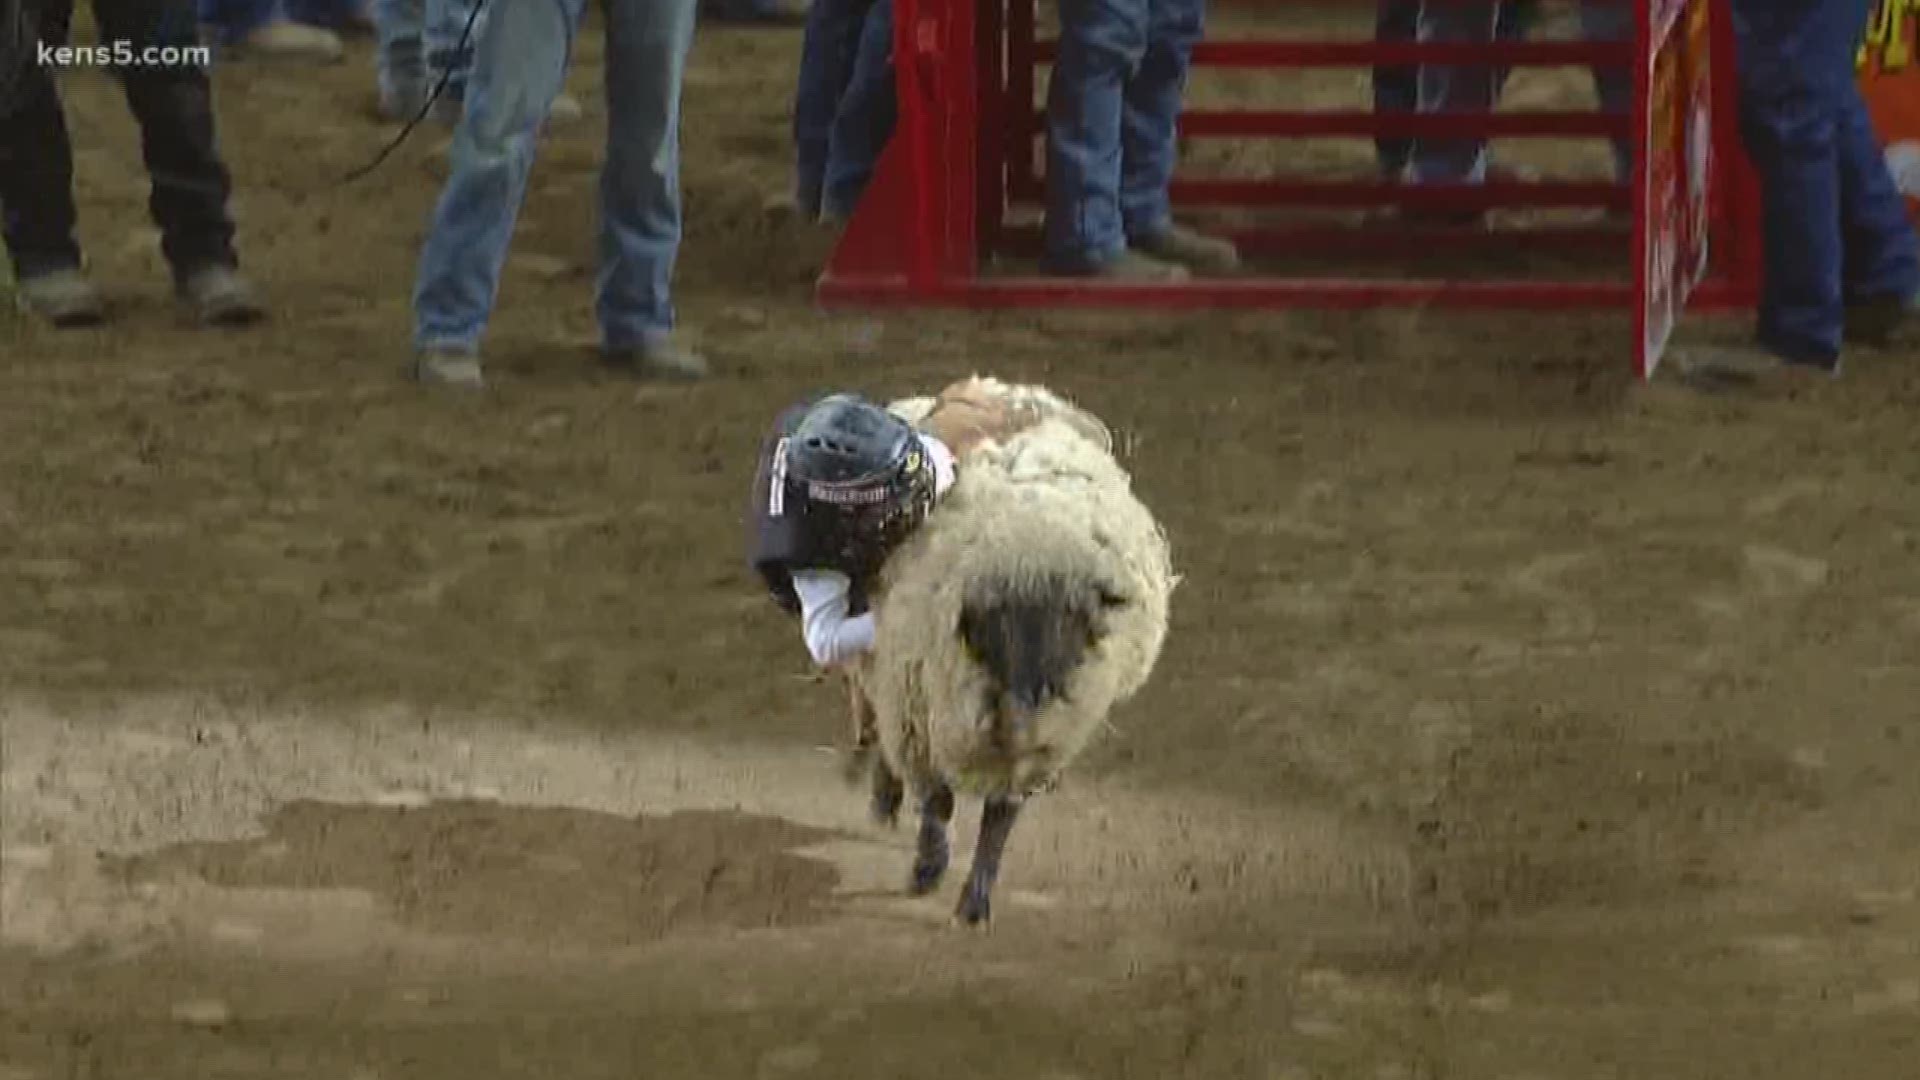 But not before some more young cowpokes tested their sheep-riding mettle.